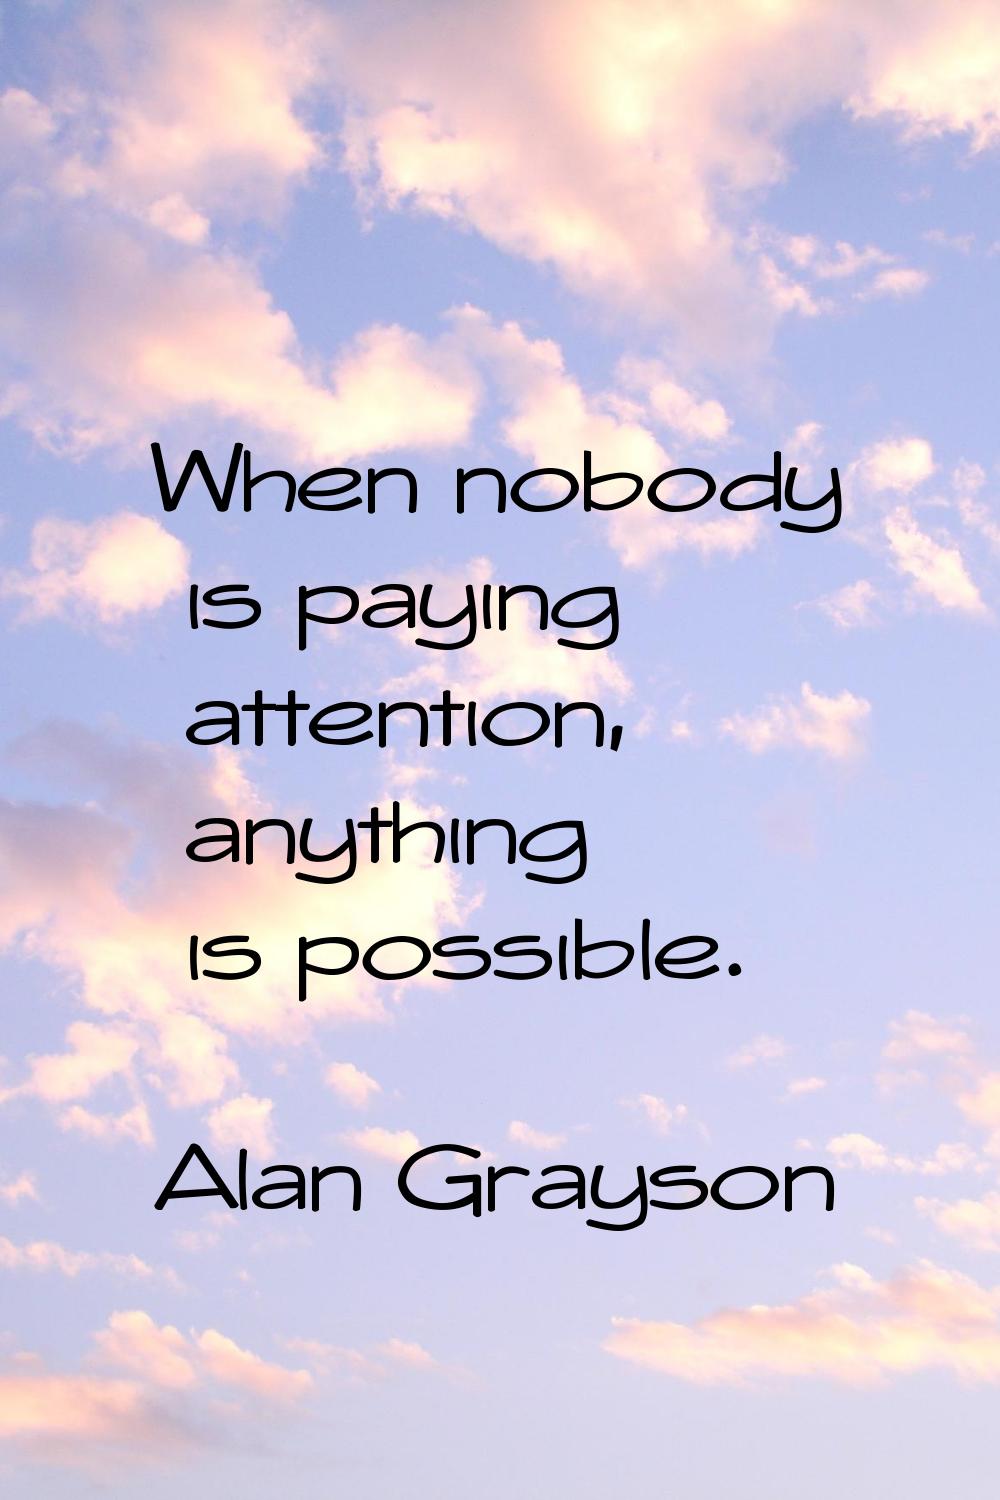 When nobody is paying attention, anything is possible.